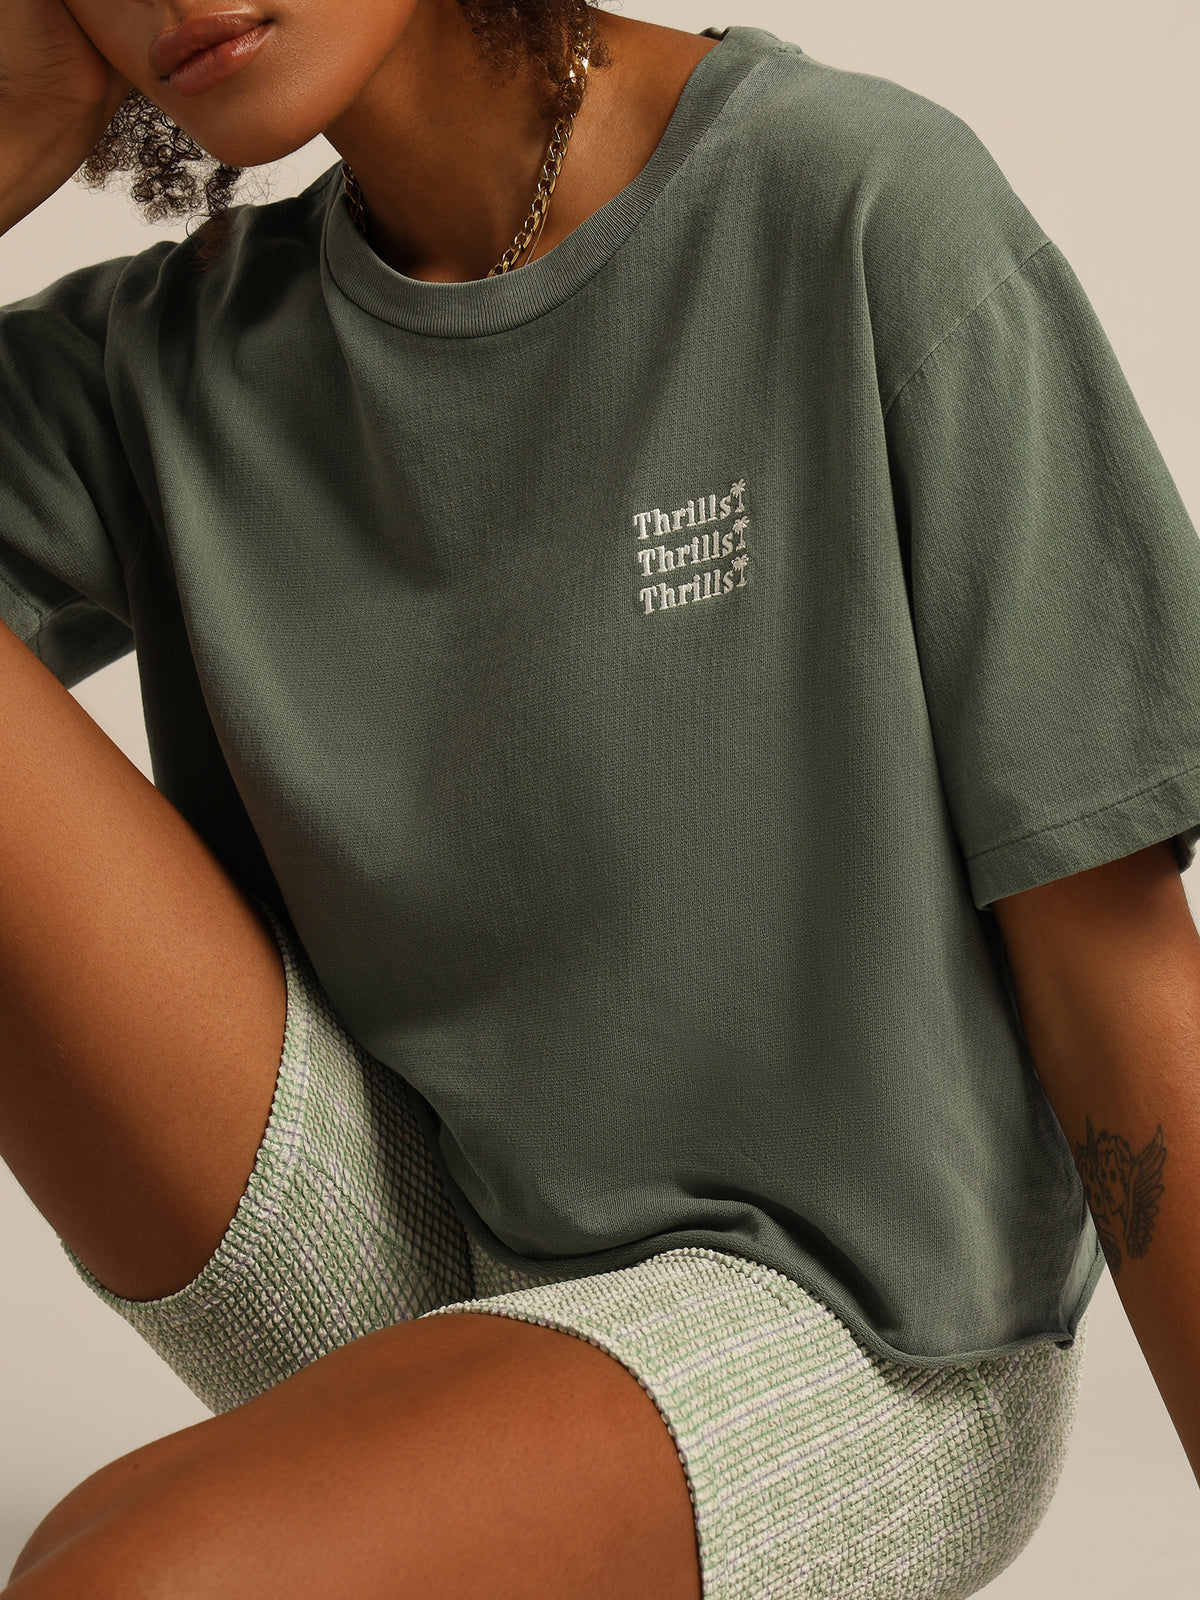 Embro Unlimited Merch Fit T-Shirt in Lume Green